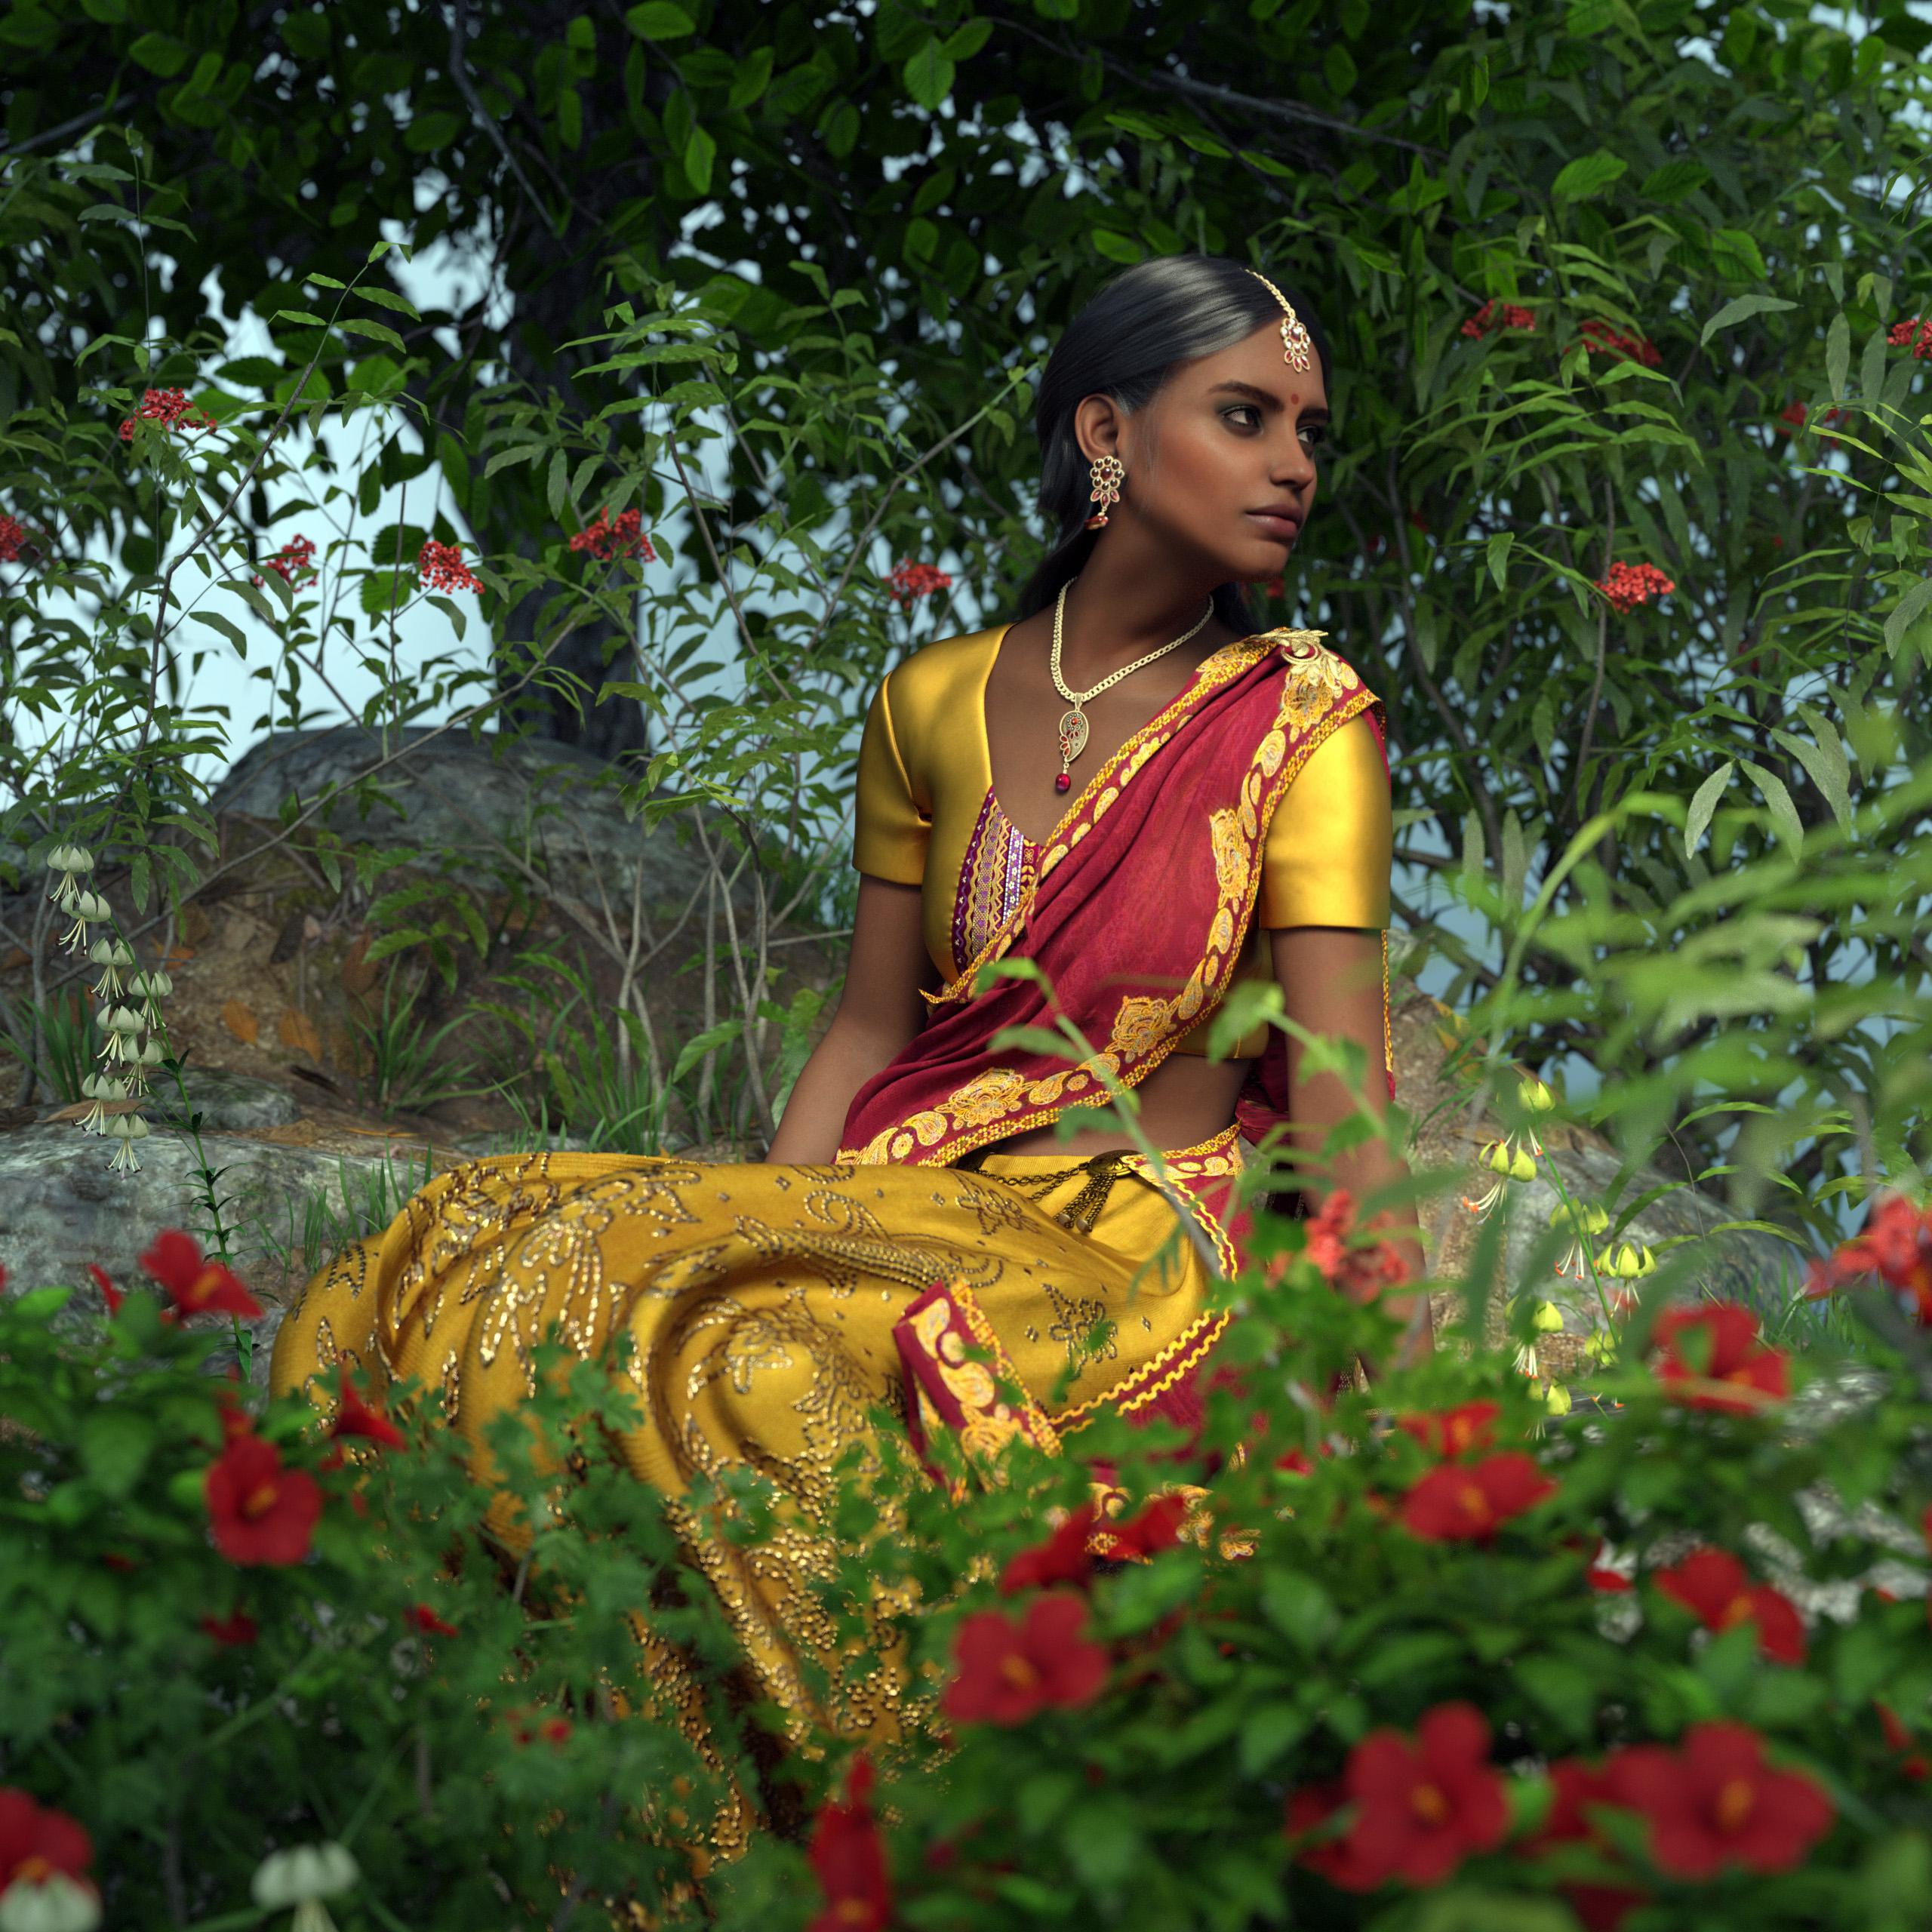 Indian girl sitting in nature